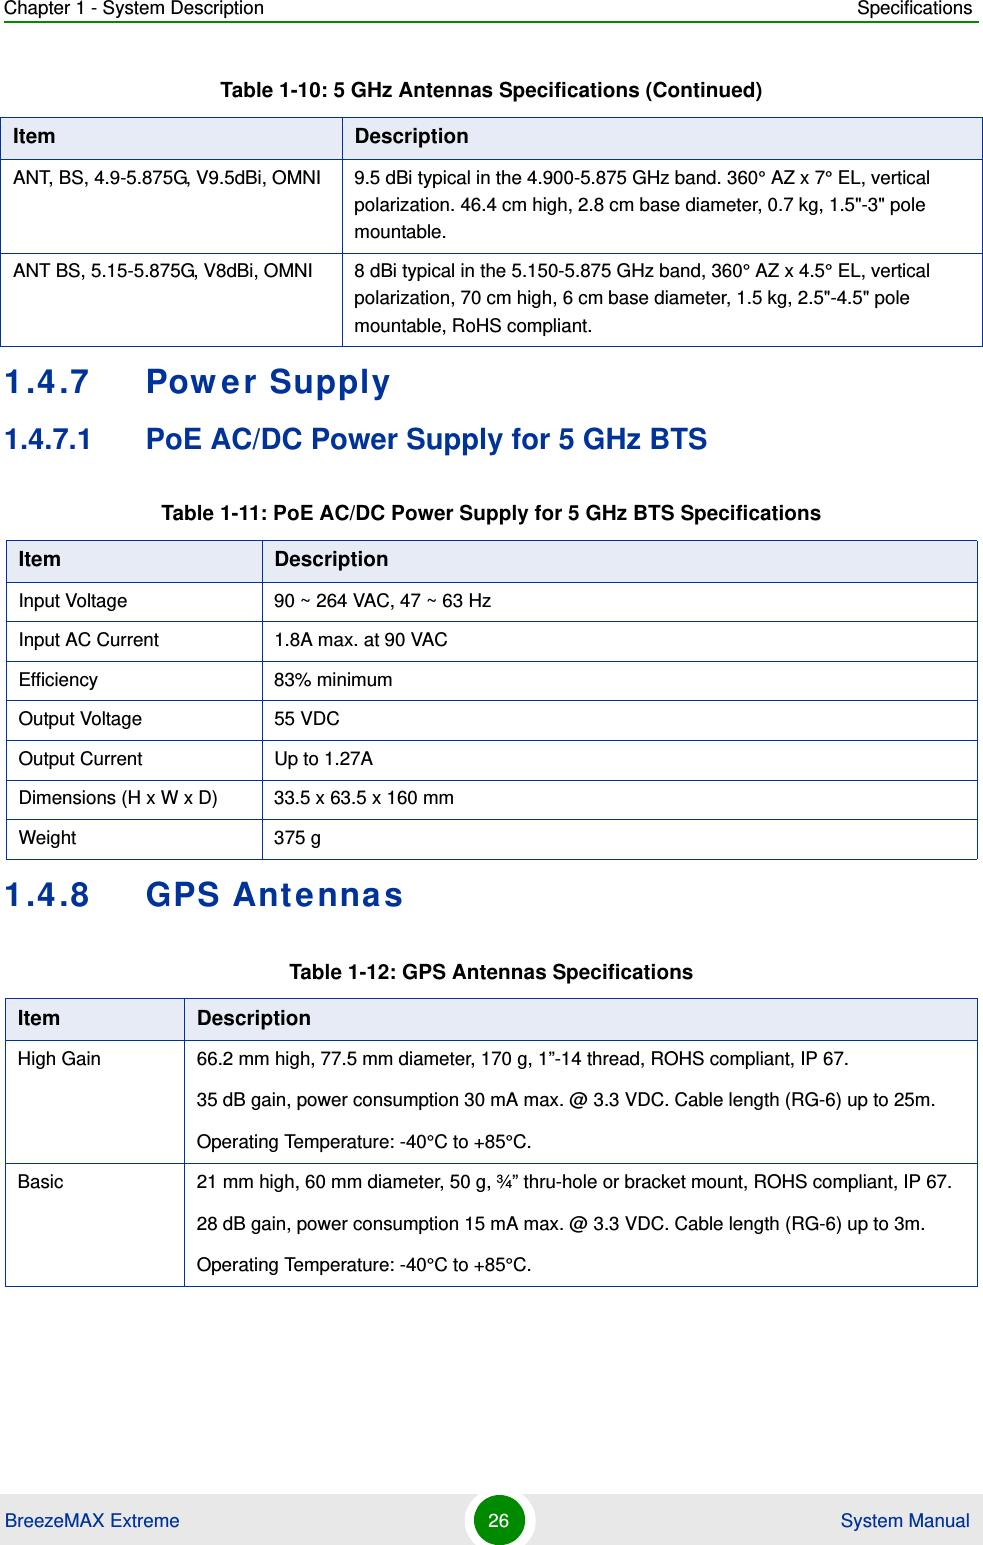 Chapter 1 - System Description SpecificationsBreezeMAX Extreme 26  System Manual1.4.7 Power Supply1.4.7.1 PoE AC/DC Power Supply for 5 GHz BTS1.4.8 GPS AntennasANT, BS, 4.9-5.875G, V9.5dBi, OMNI 9.5 dBi typical in the 4.900-5.875 GHz band. 360° AZ x 7° EL, vertical polarization. 46.4 cm high, 2.8 cm base diameter, 0.7 kg, 1.5&quot;-3&quot; pole mountable.ANT BS, 5.15-5.875G, V8dBi, OMNI 8 dBi typical in the 5.150-5.875 GHz band, 360° AZ x 4.5° EL, vertical polarization, 70 cm high, 6 cm base diameter, 1.5 kg, 2.5&quot;-4.5&quot; pole mountable, RoHS compliant.Table 1-11: PoE AC/DC Power Supply for 5 GHz BTS SpecificationsItem DescriptionInput Voltage 90 ~ 264 VAC, 47 ~ 63 HzInput AC Current 1.8A max. at 90 VAC Efficiency 83% minimumOutput Voltage 55 VDCOutput Current Up to 1.27ADimensions (H x W x D) 33.5 x 63.5 x 160 mmWeight 375 gTable 1-12: GPS Antennas SpecificationsItem DescriptionHigh Gain 66.2 mm high, 77.5 mm diameter, 170 g, 1”-14 thread, ROHS compliant, IP 67.35 dB gain, power consumption 30 mA max. @ 3.3 VDC. Cable length (RG-6) up to 25m.Operating Temperature: -40°C to +85°C.Basic 21 mm high, 60 mm diameter, 50 g, ¾” thru-hole or bracket mount, ROHS compliant, IP 67.28 dB gain, power consumption 15 mA max. @ 3.3 VDC. Cable length (RG-6) up to 3m. Operating Temperature: -40°C to +85°C.Table 1-10: 5 GHz Antennas Specifications (Continued)Item Description